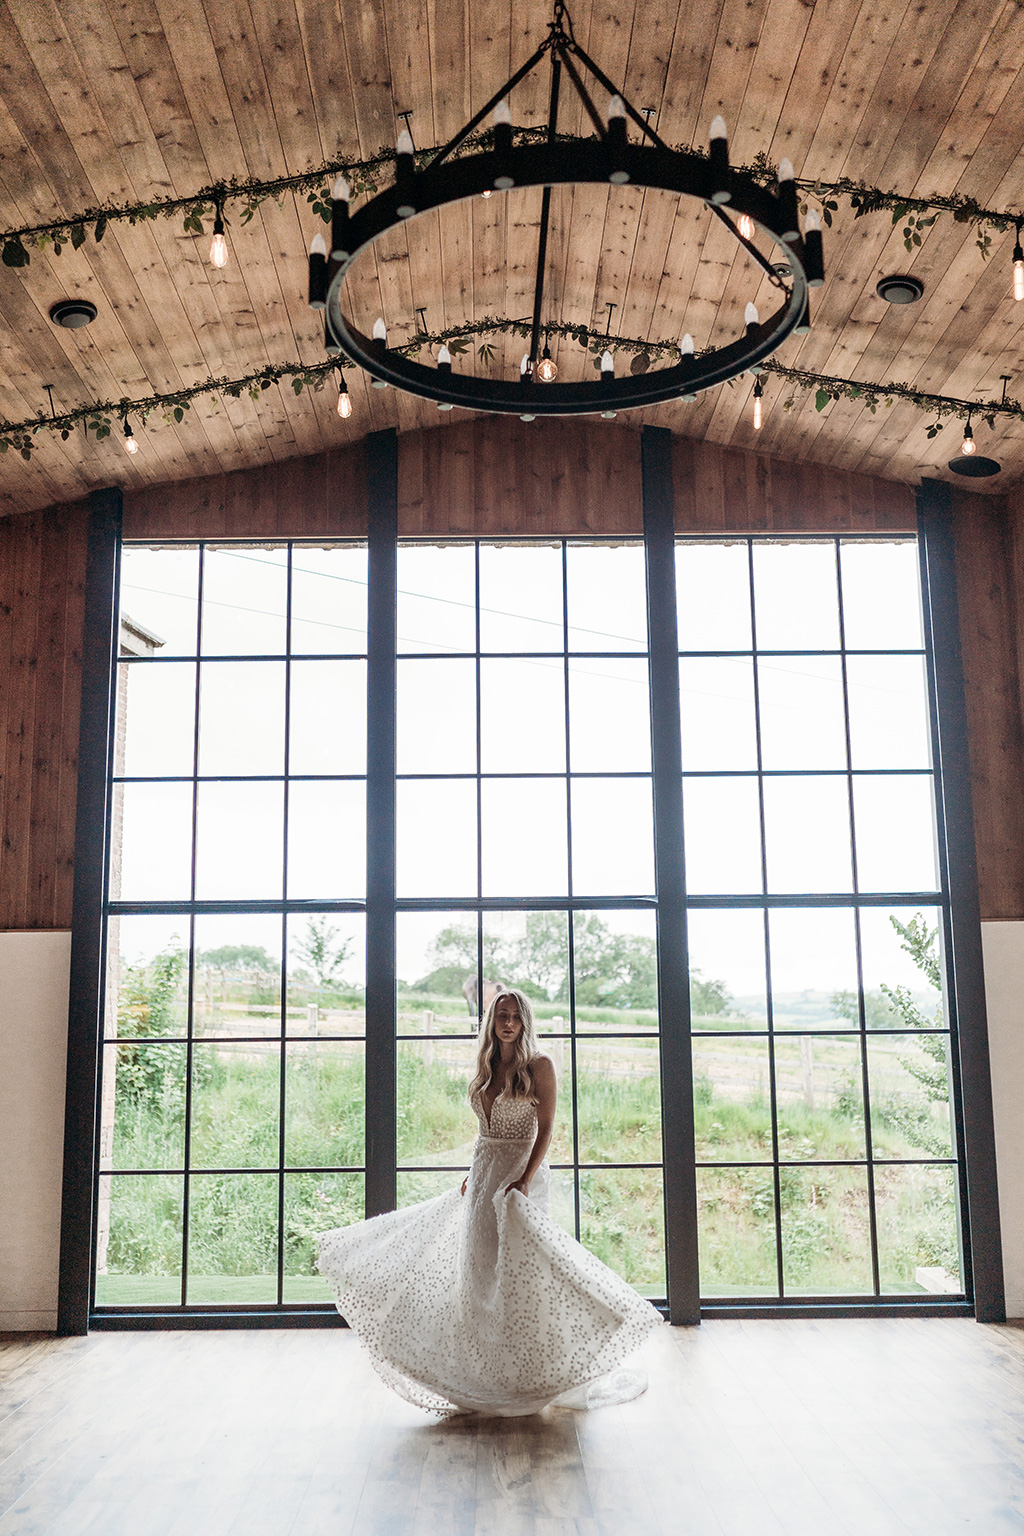 The Stable Barn at Upton Barn & Walled Garden | Image by Kamila Nowak Photography